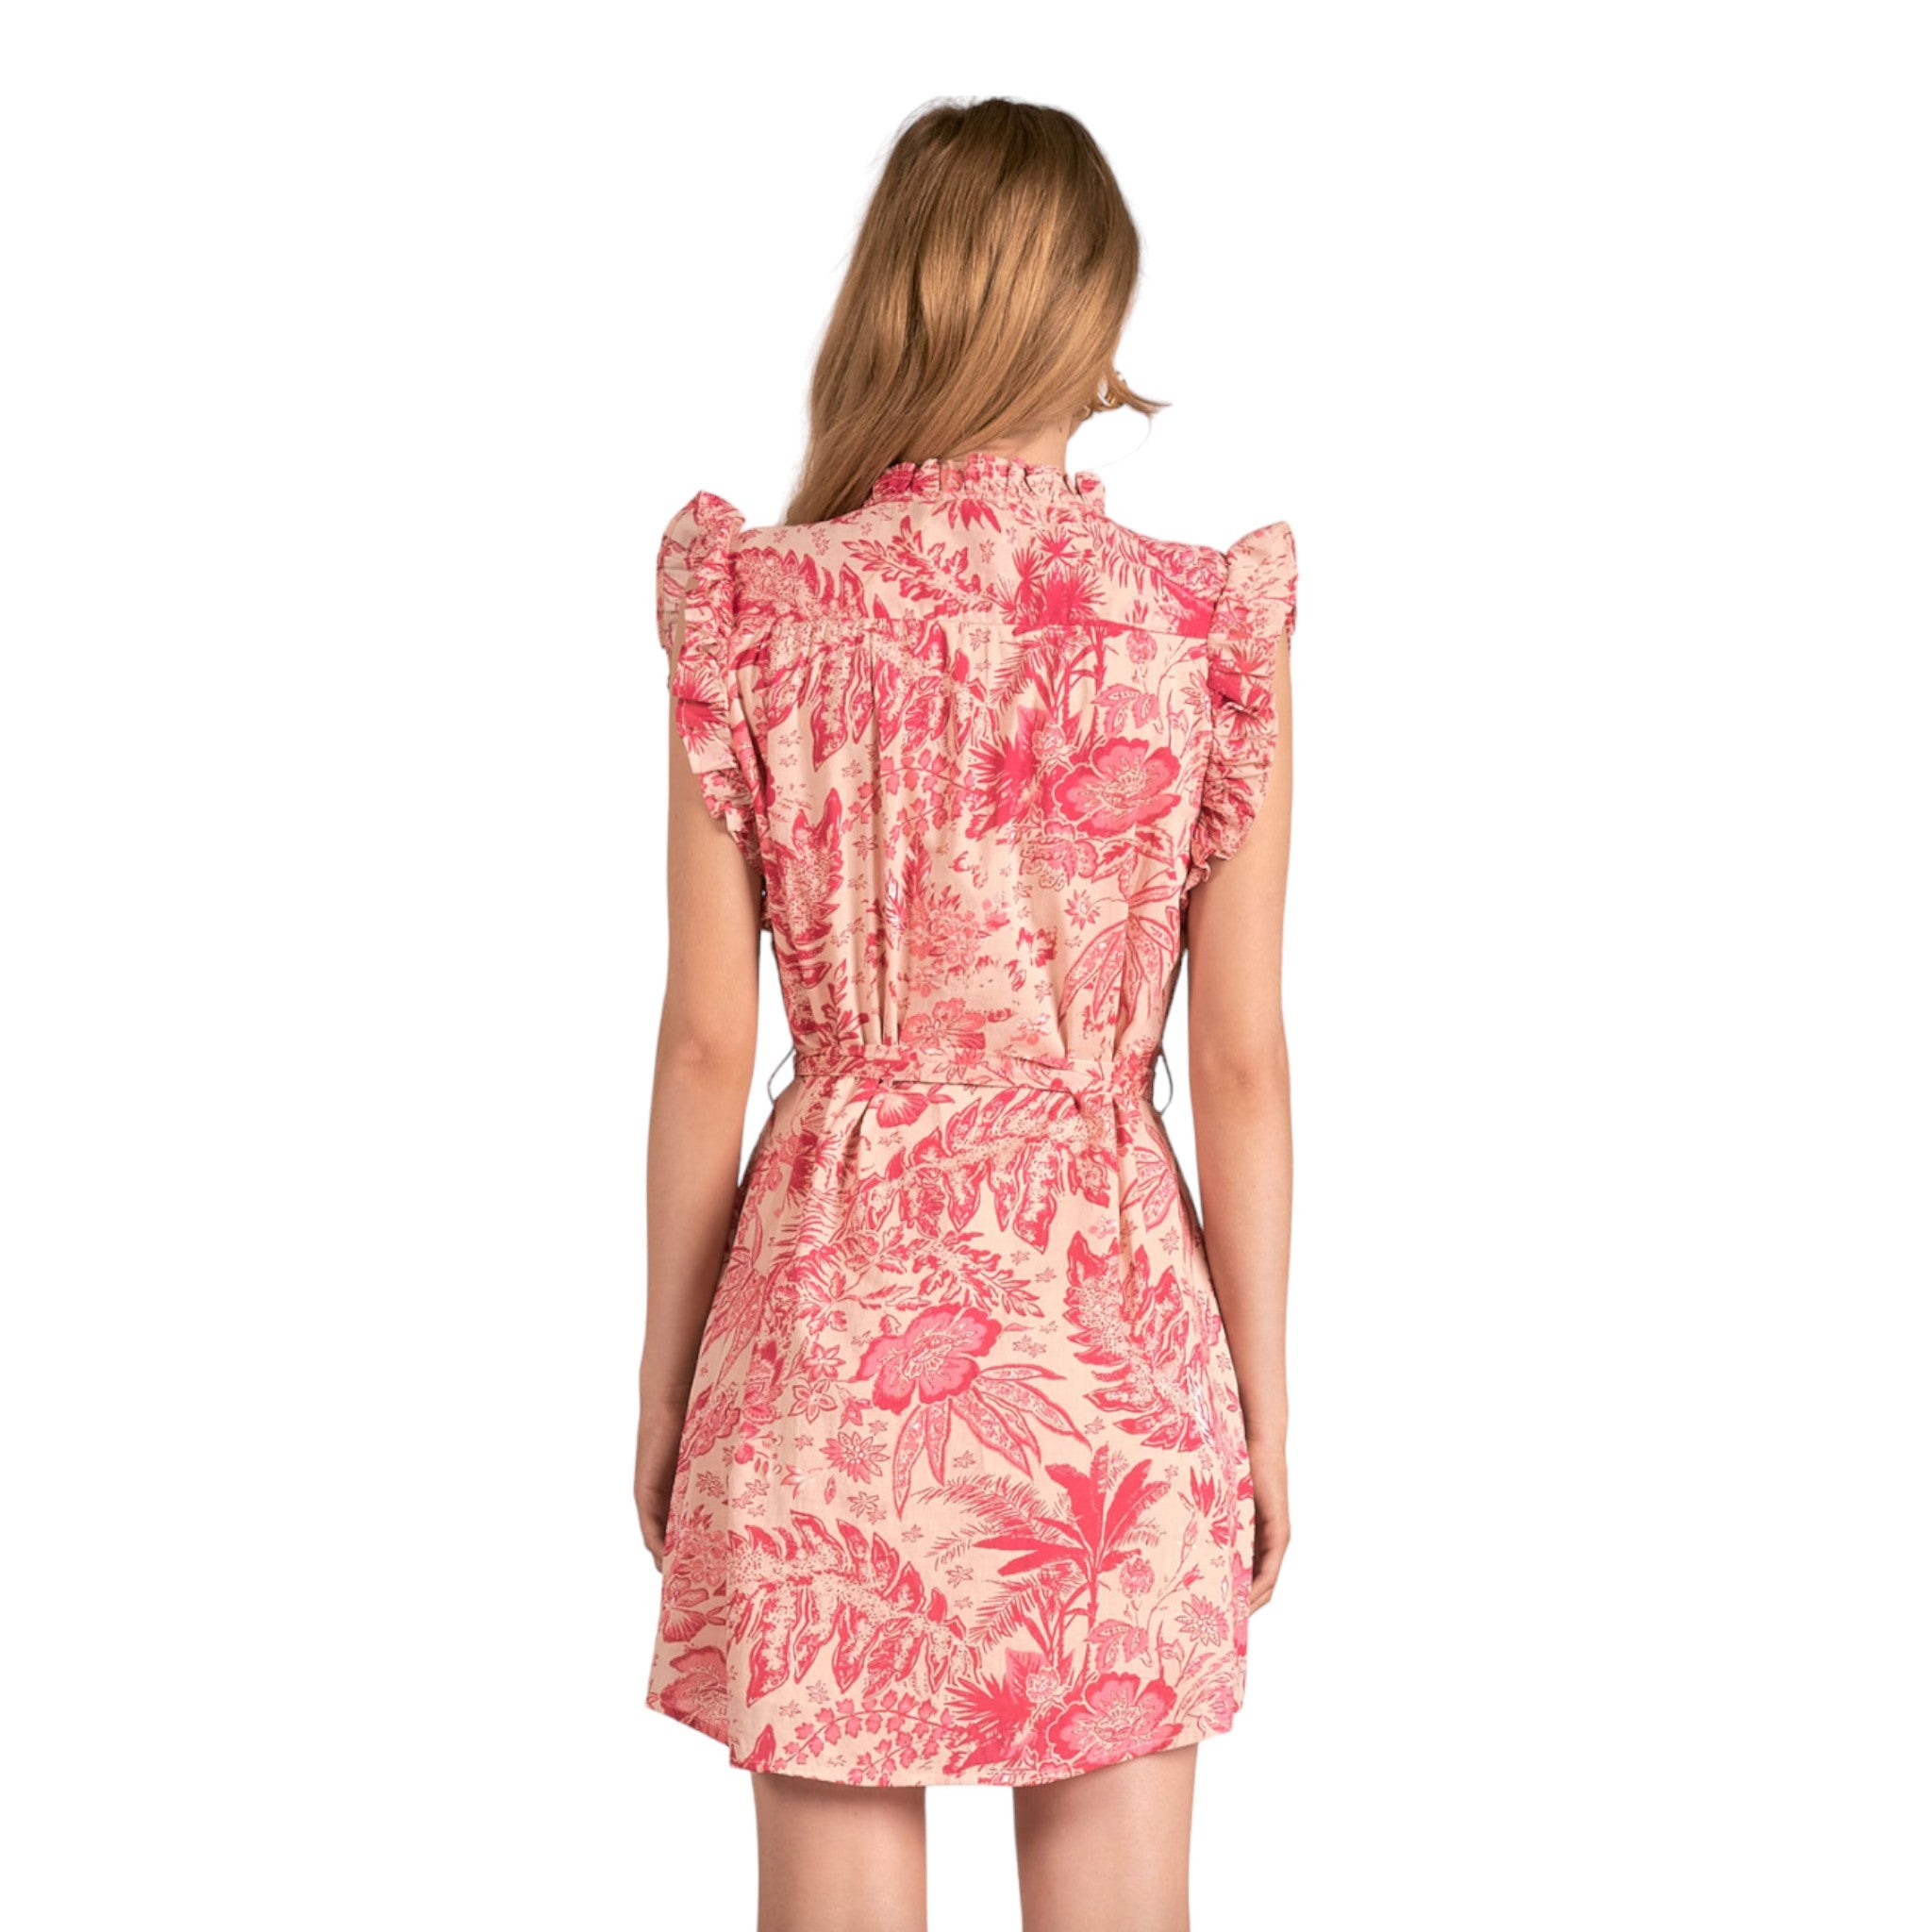 Elan - Ruffle Sleeve Dress with Belt - Pink Leafy Floral